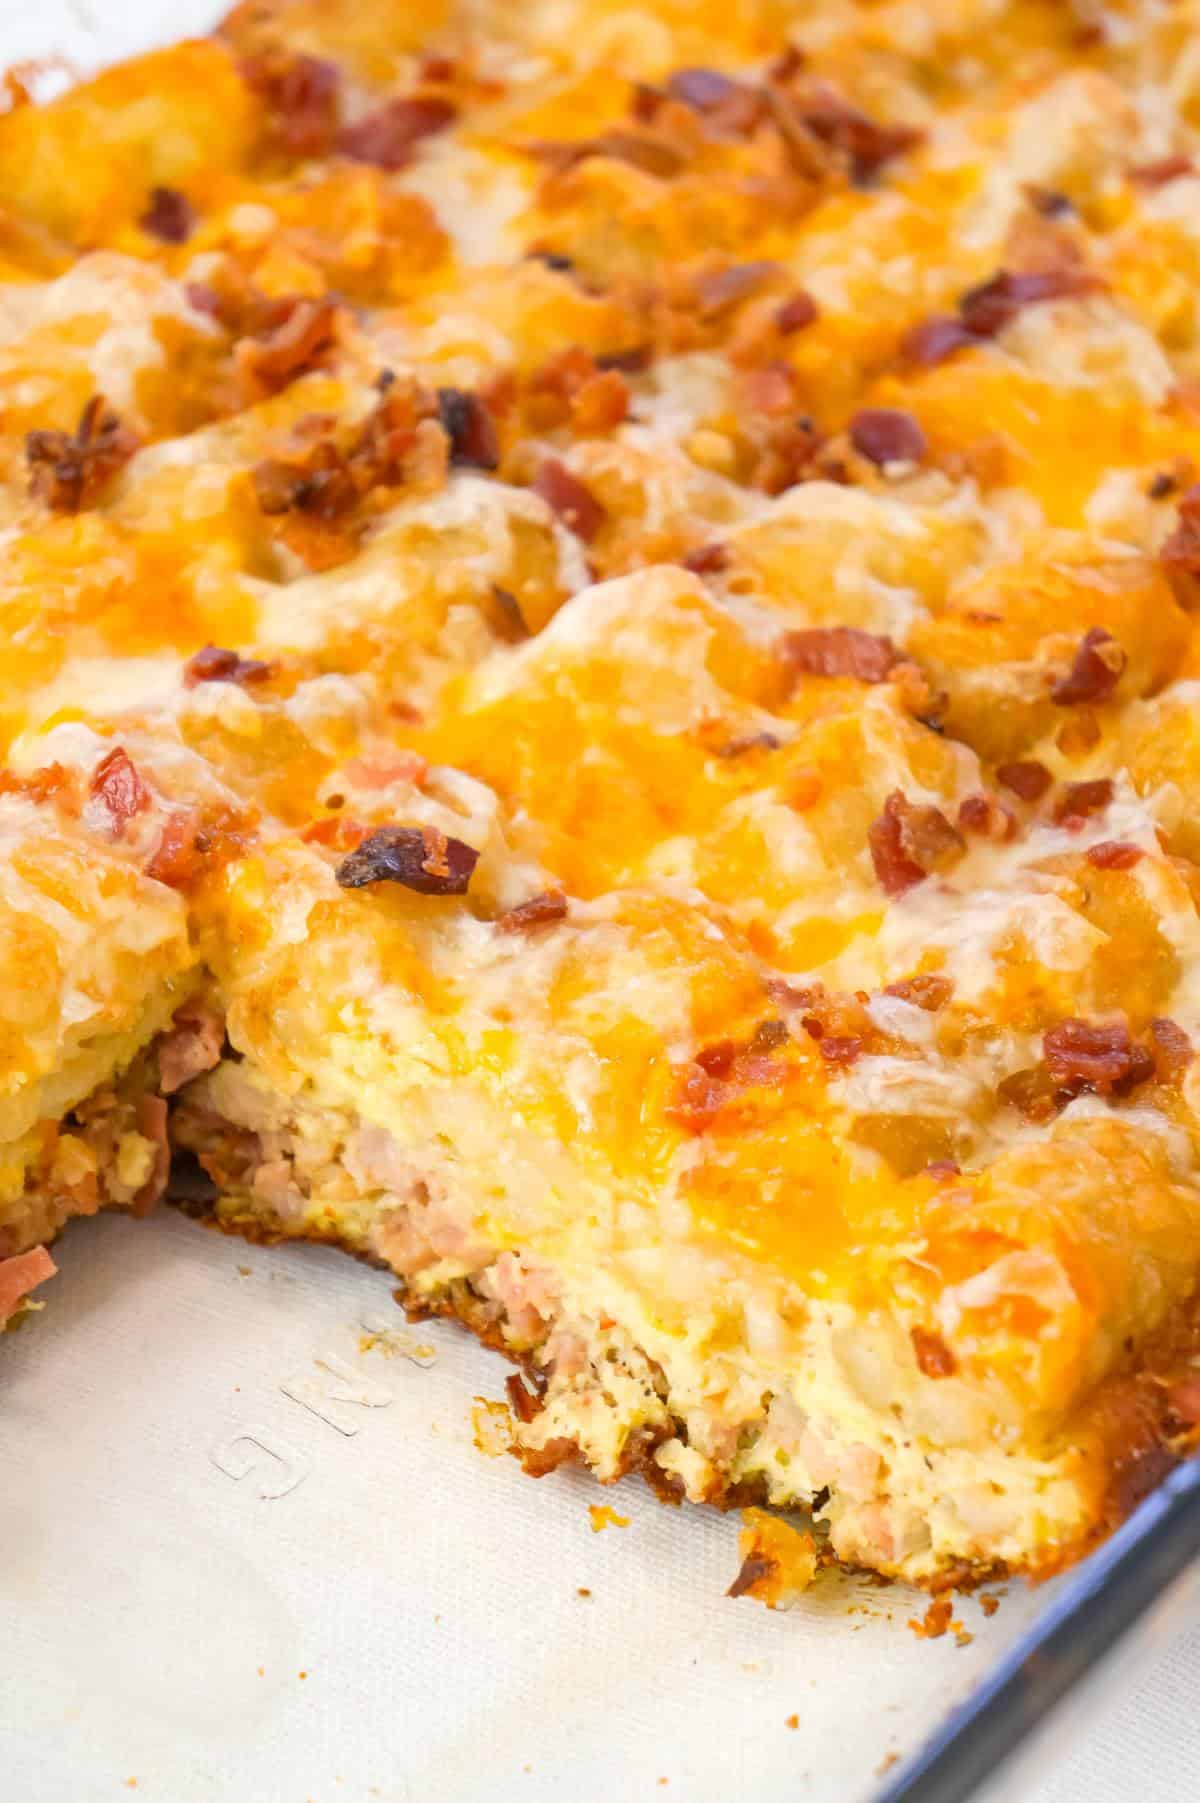 Tater Tot Breakfast Casserole is a hearty casserole recipe loaded with pork sausage meat, diced onion, chopped ham, crumbled bacon, eggs, shredded cheese and topped with tater tots.